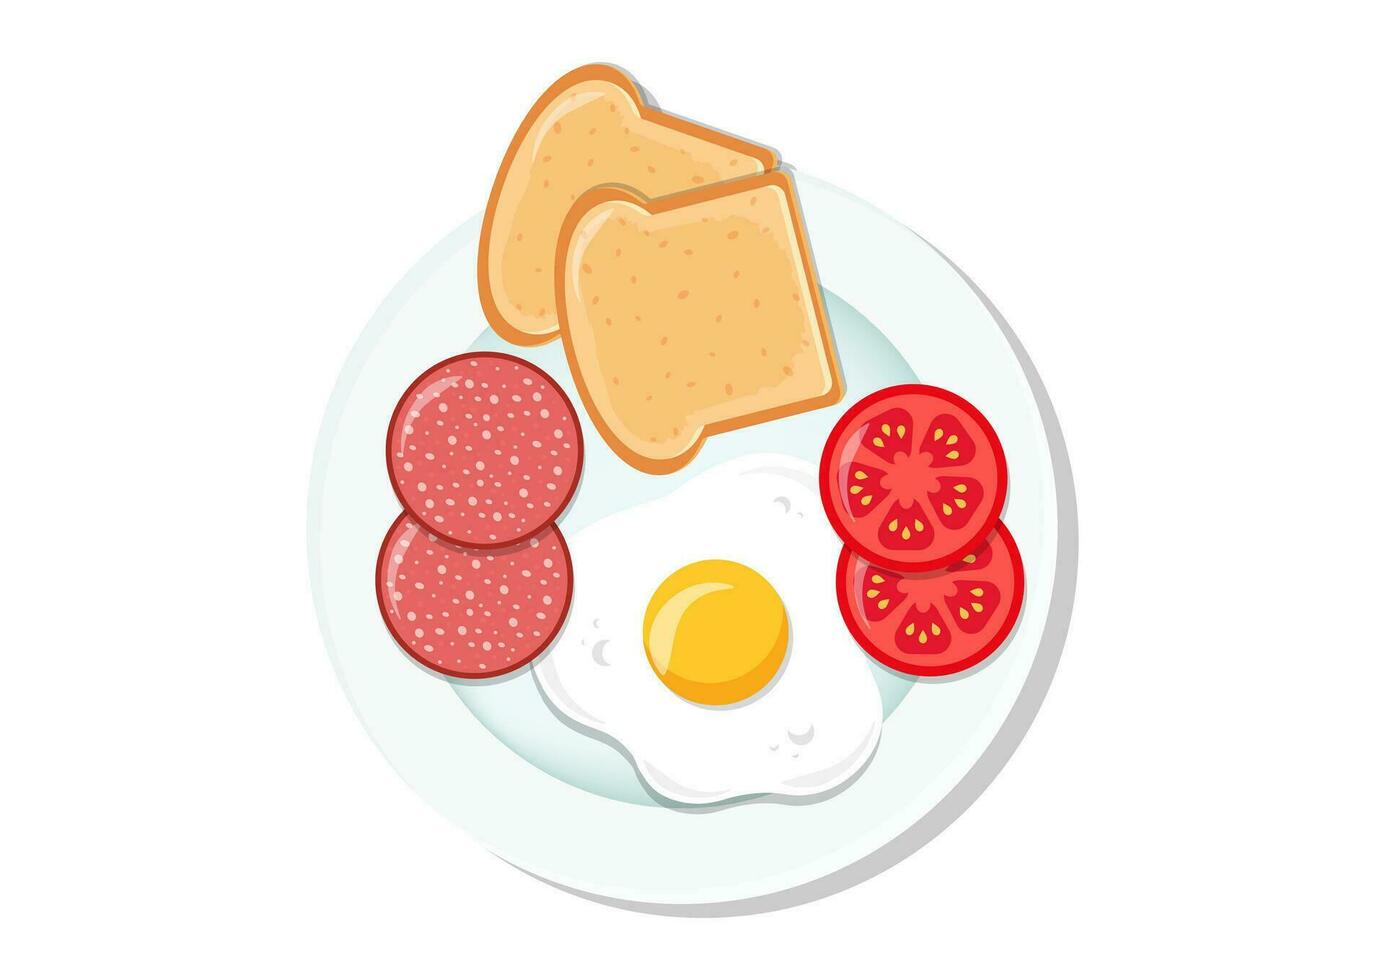 Breakfast Plate with Fried Egg, Tomato Pepperoni and Toasted Bread Vector Flat Design